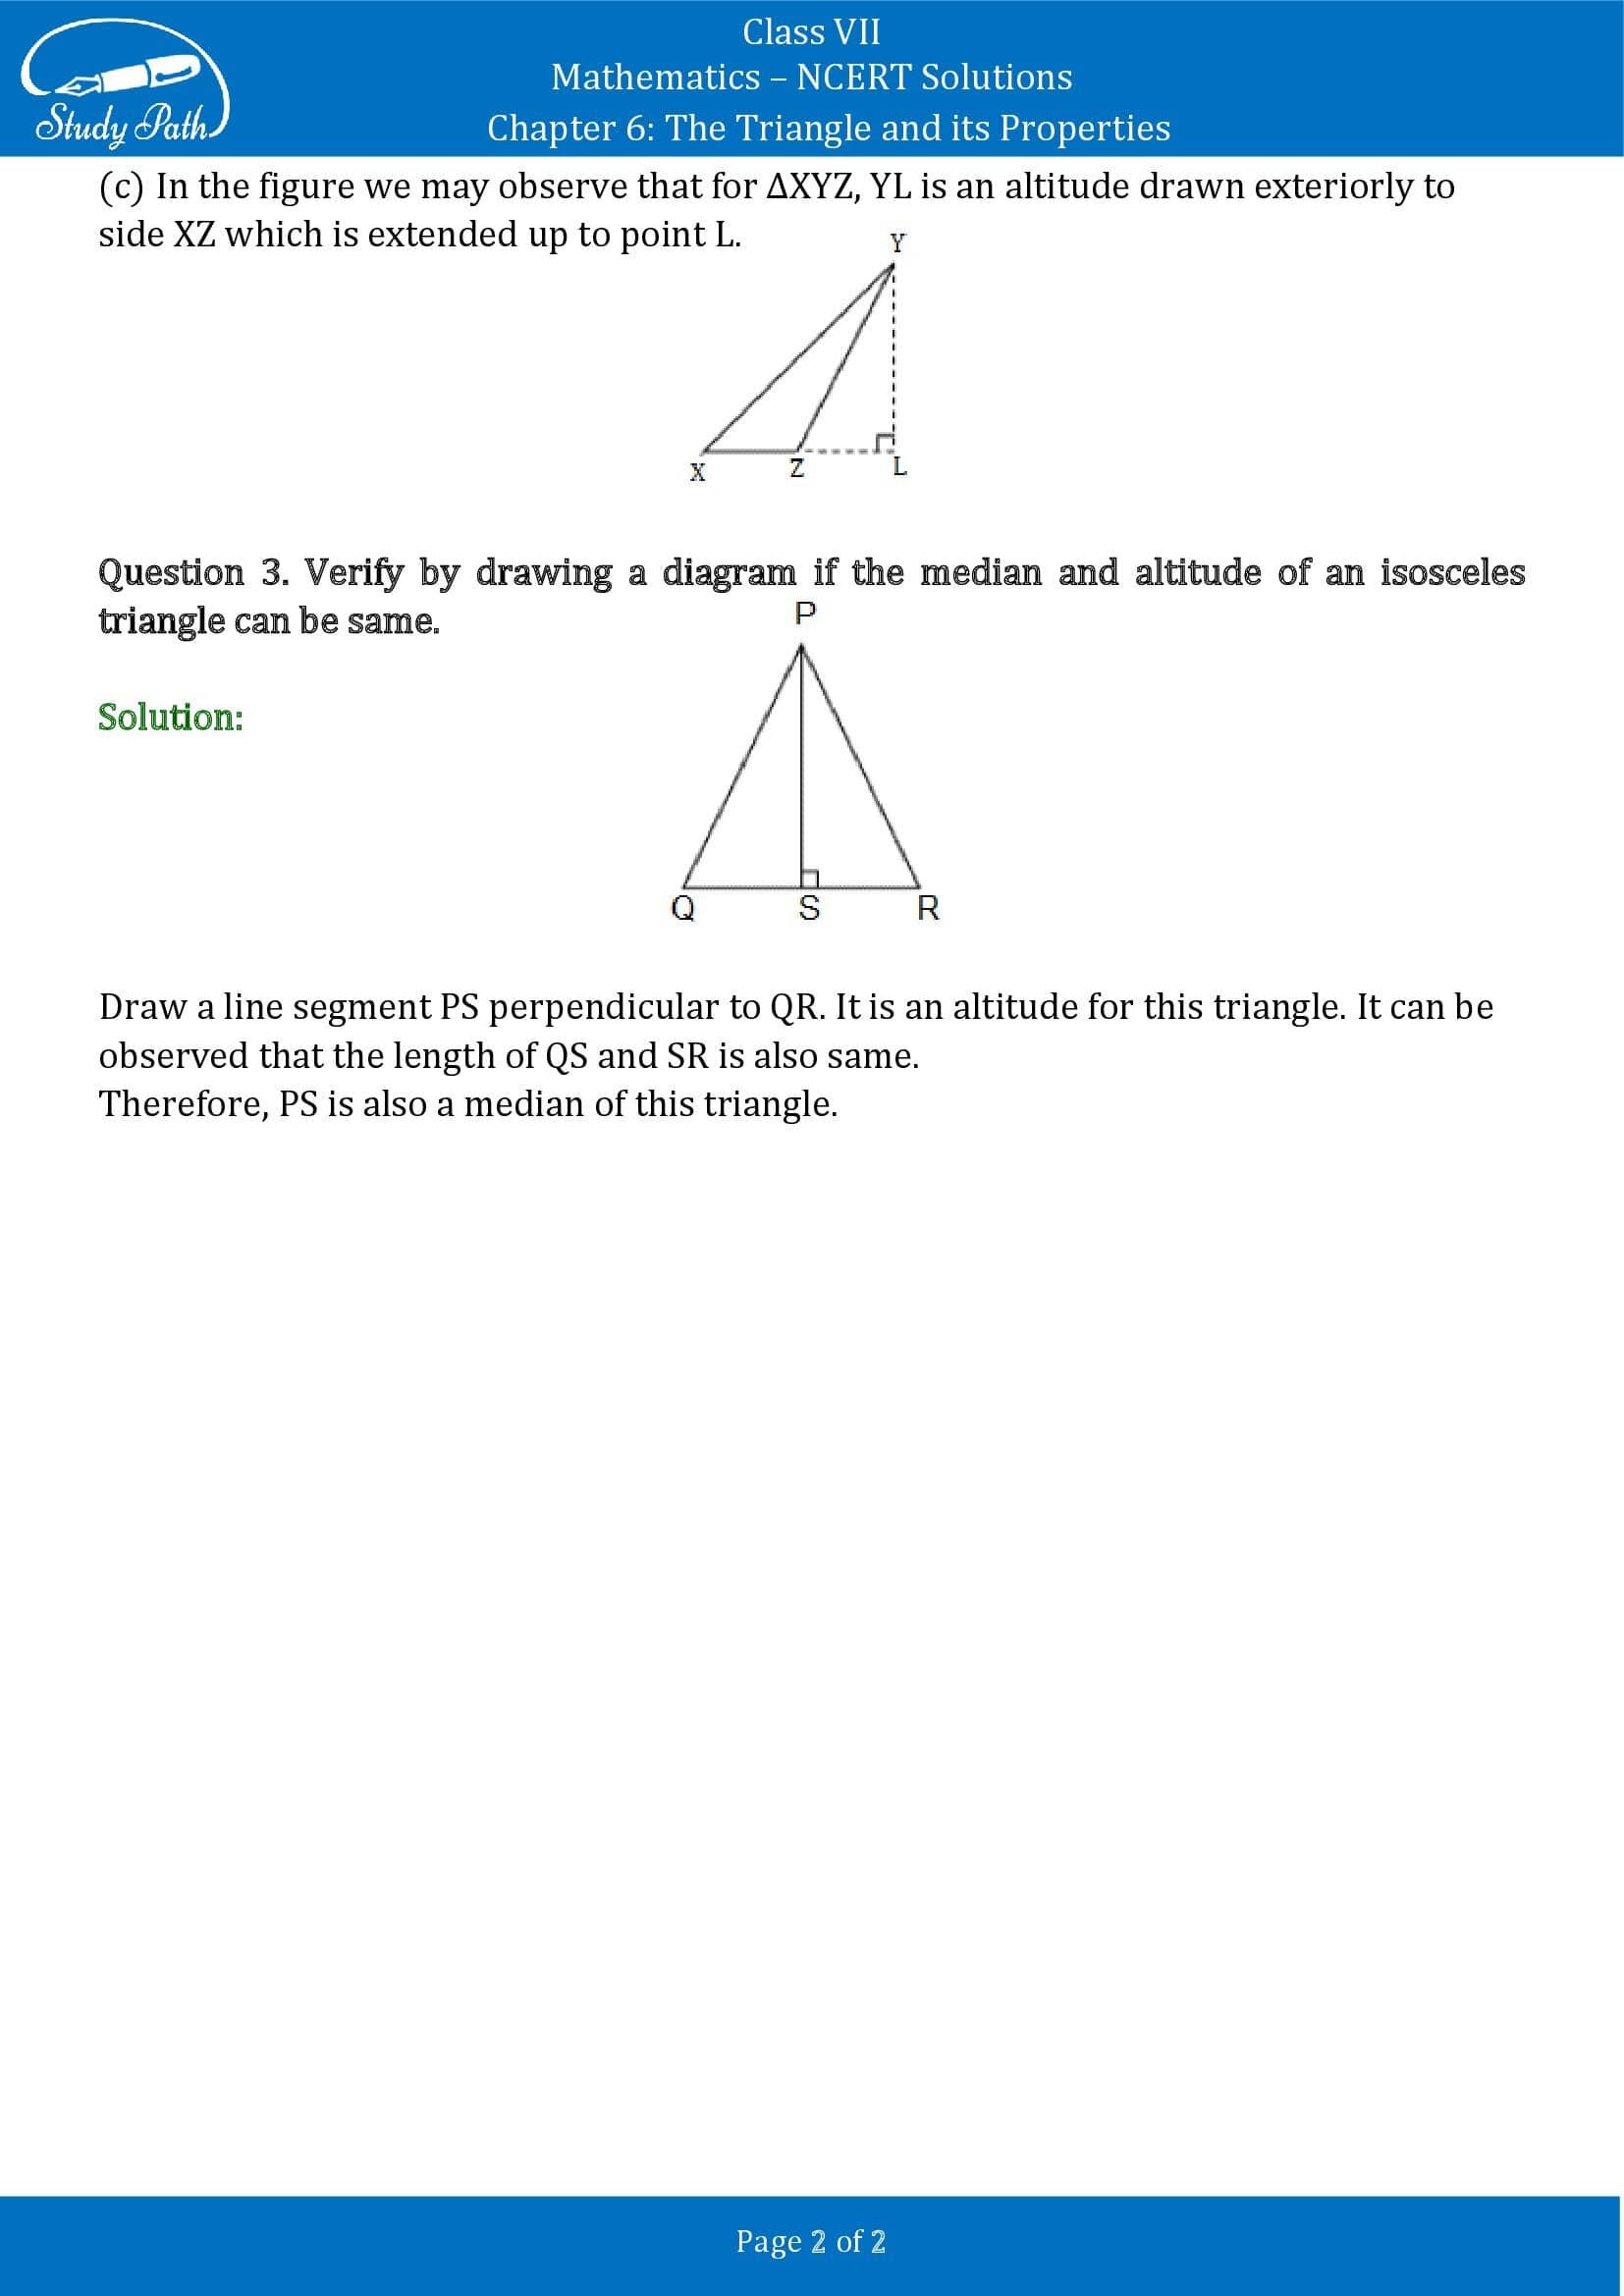 NCERT Solutions for Class 7 Maths Chapter 6 The Triangle and its Properties Exercise 6.1 00002